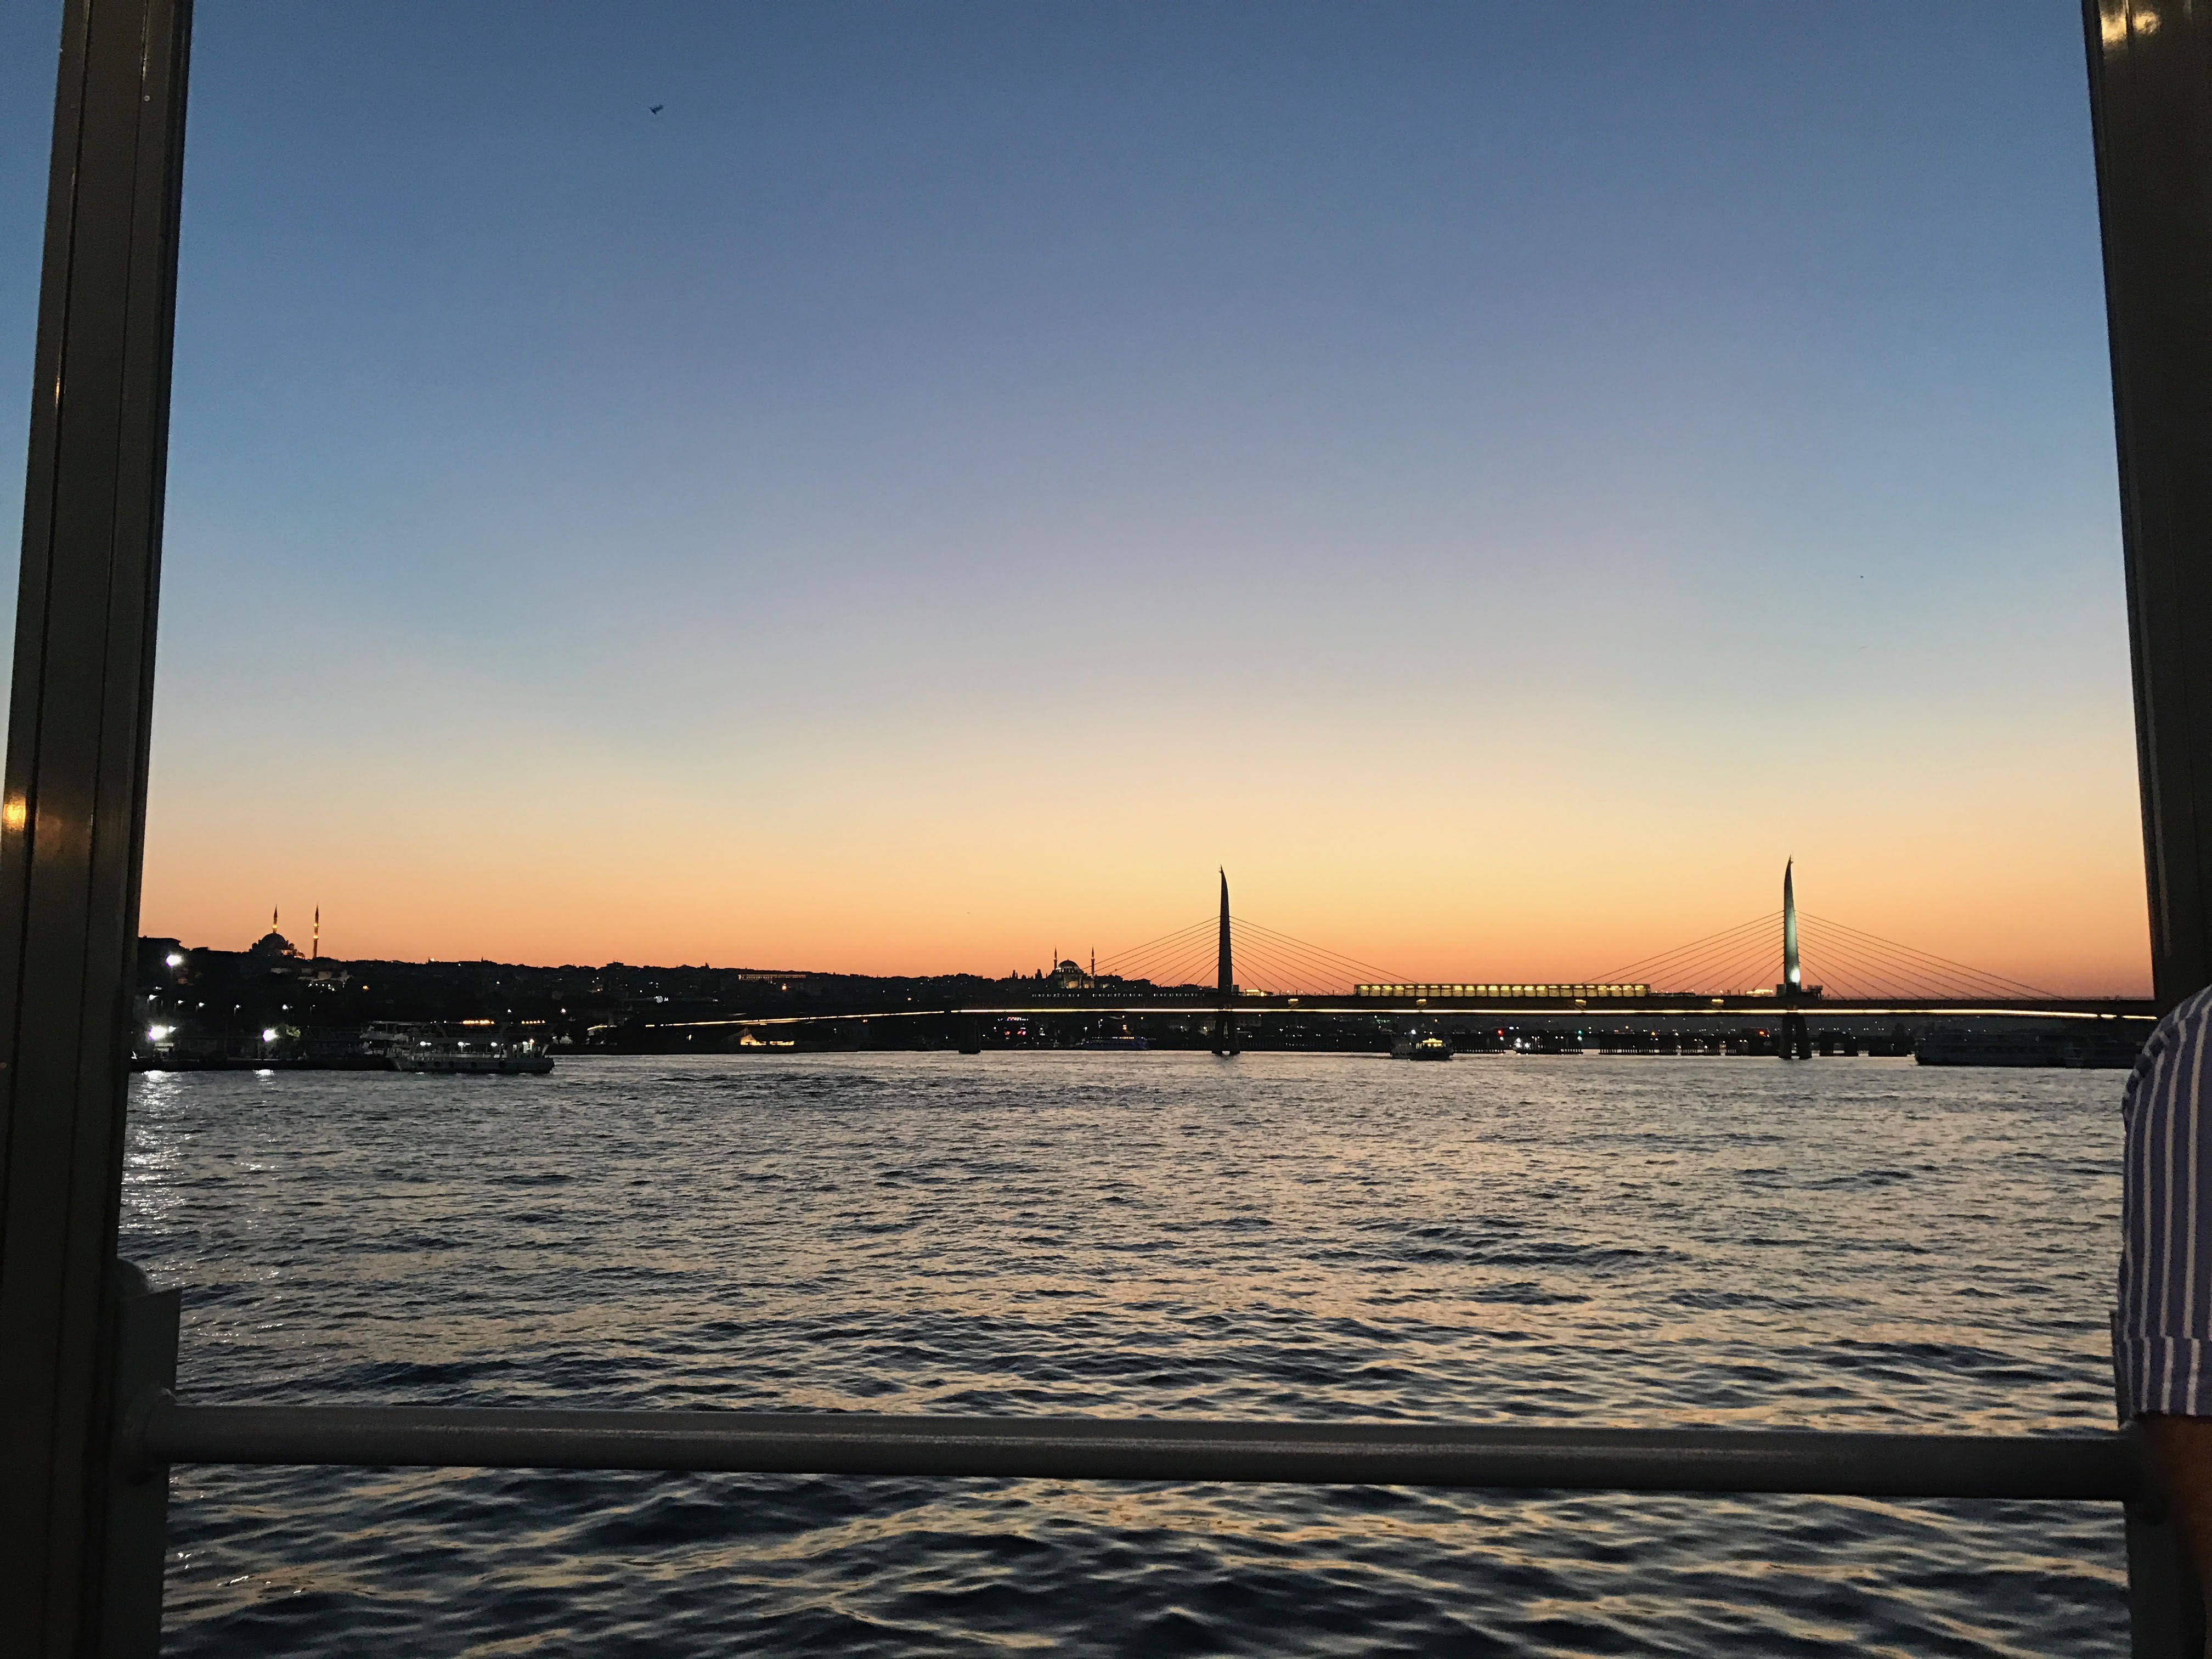 The view from the Galata Bridge at sunset in Istanbul on July 22.